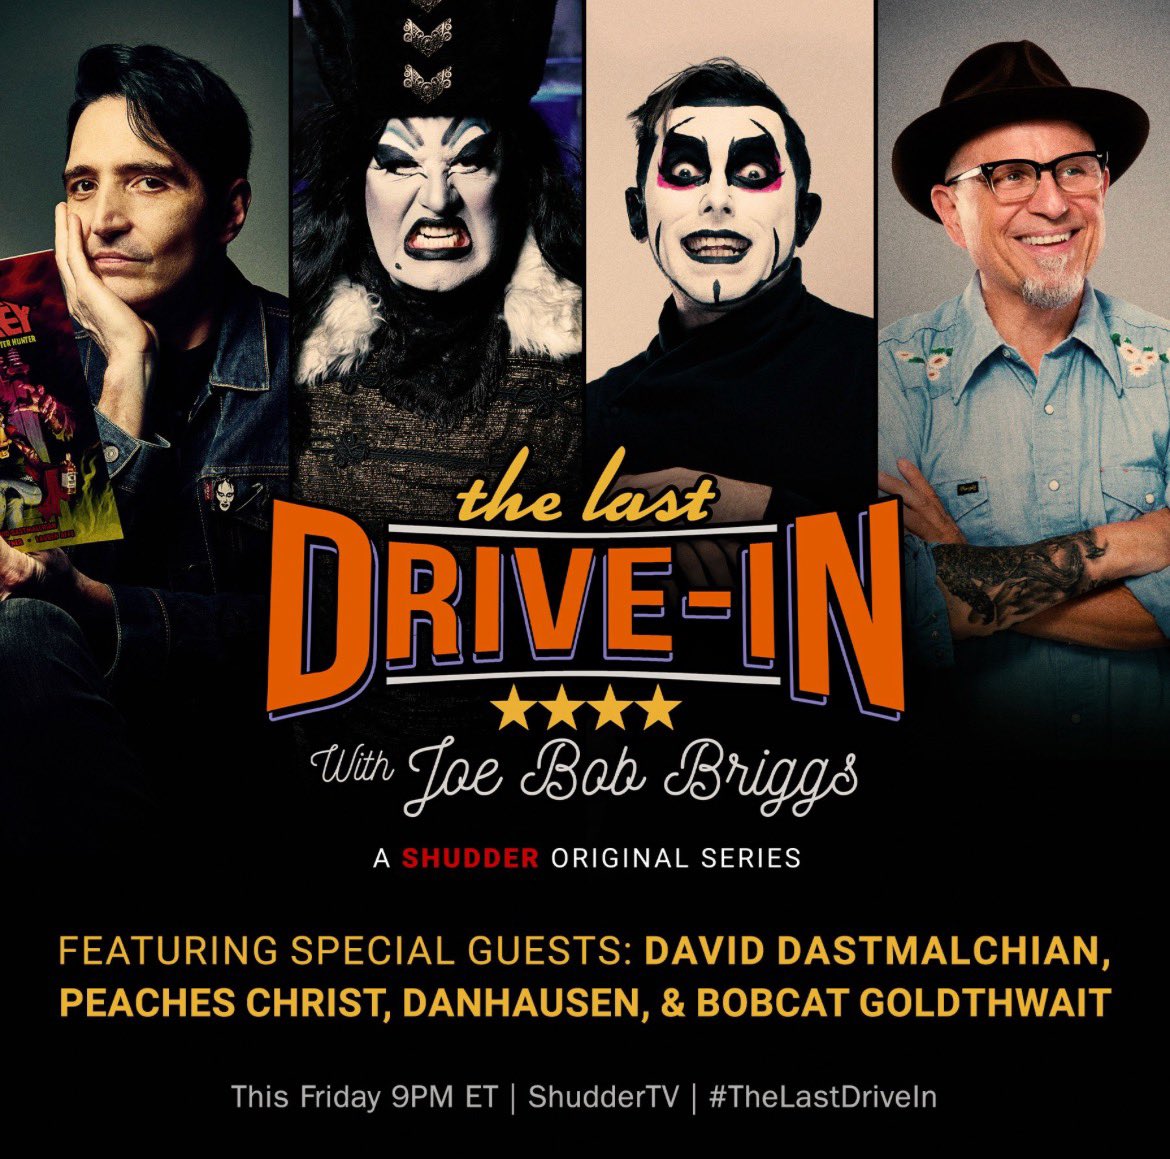 You won’t believe who’s joining tomorrow’s party! #TheLastDriveIn with @therealjoebob @kinky_horror on @Shudder! #DavidDastmalchian @PeachesChrist @DanhausenAD #bobcatgoldthwait #CountCrowley